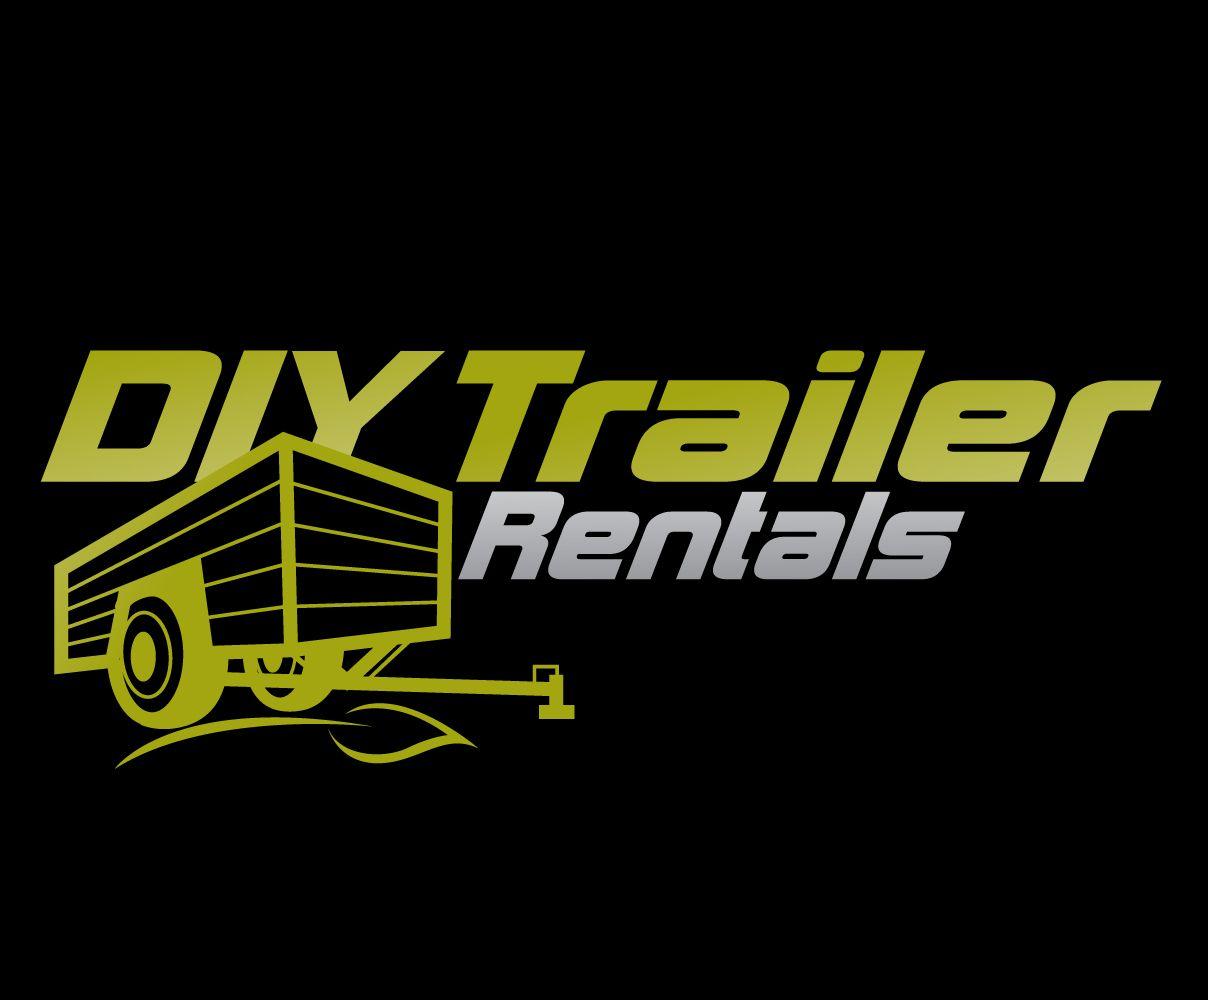 Trailer Company Logo - It Company Logo Design for DIY Trailer Rentals by Graphicsexpert ...